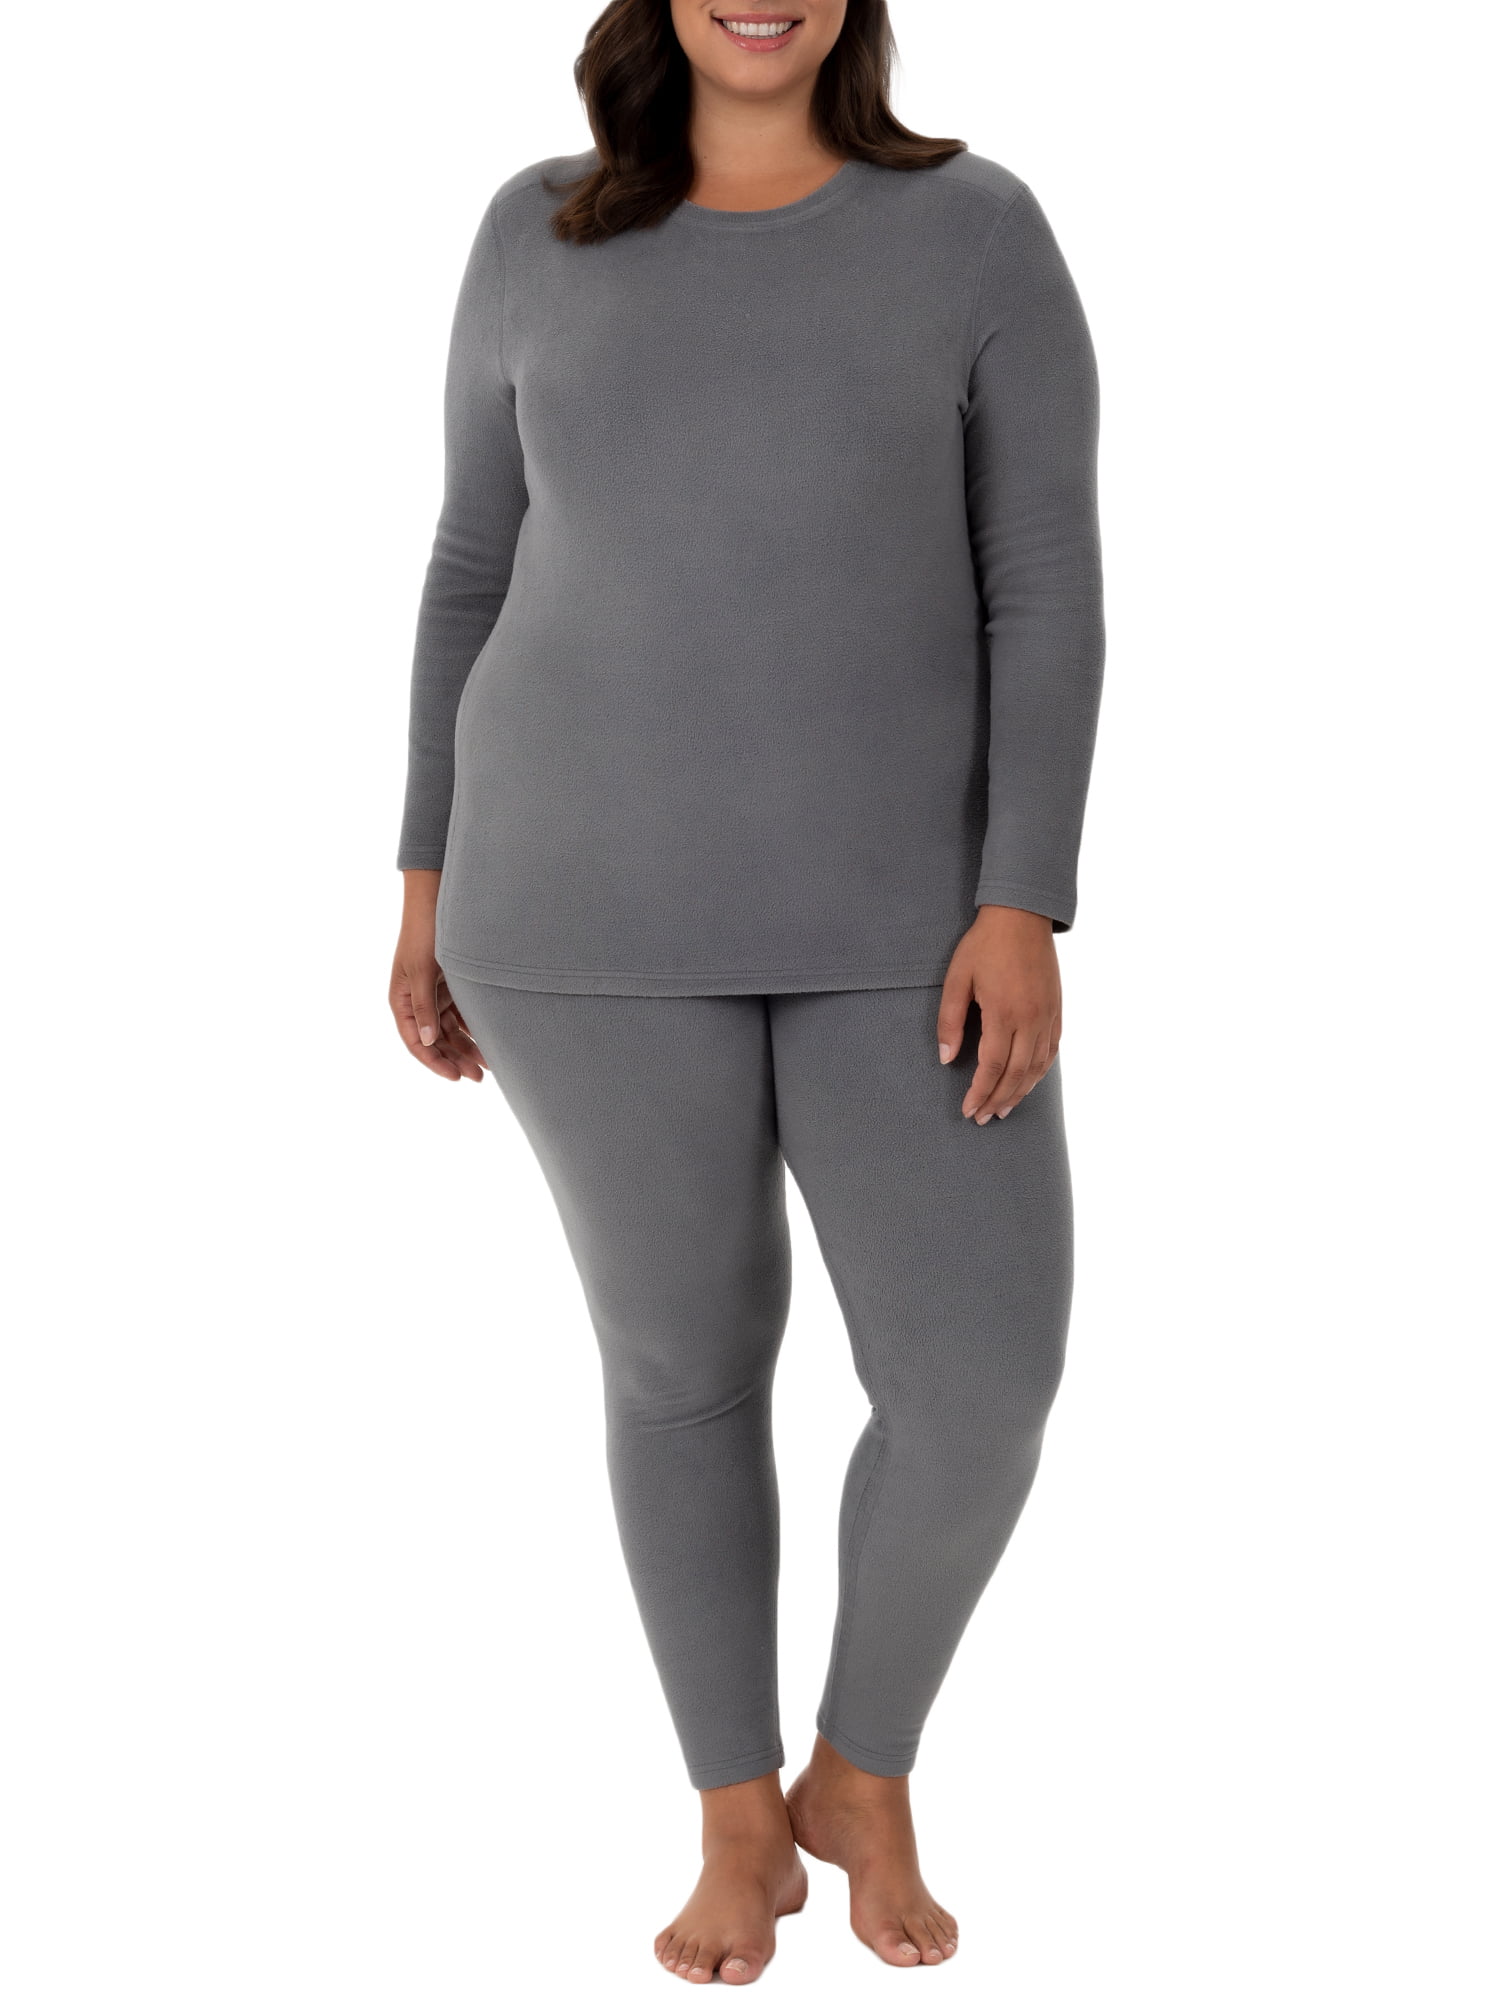 Plus Size Blue Tights|plus Size Thermal Tights For Women - High Waist Warm  Winter Pantyhose